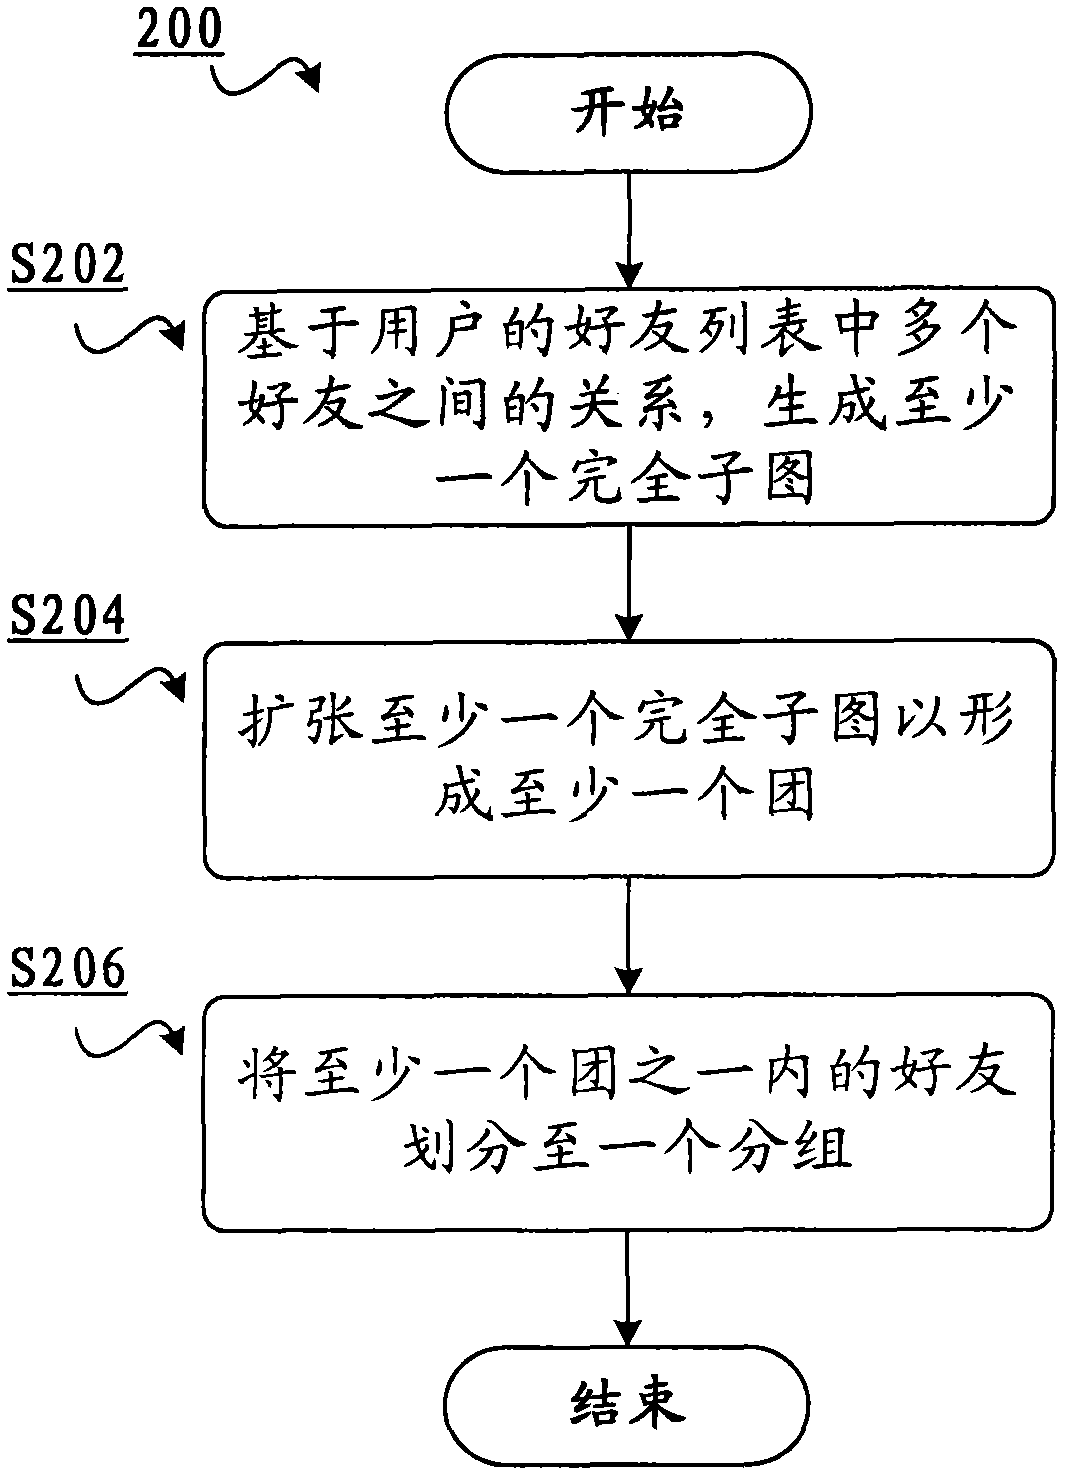 Method and apparatus for grouping users' friends